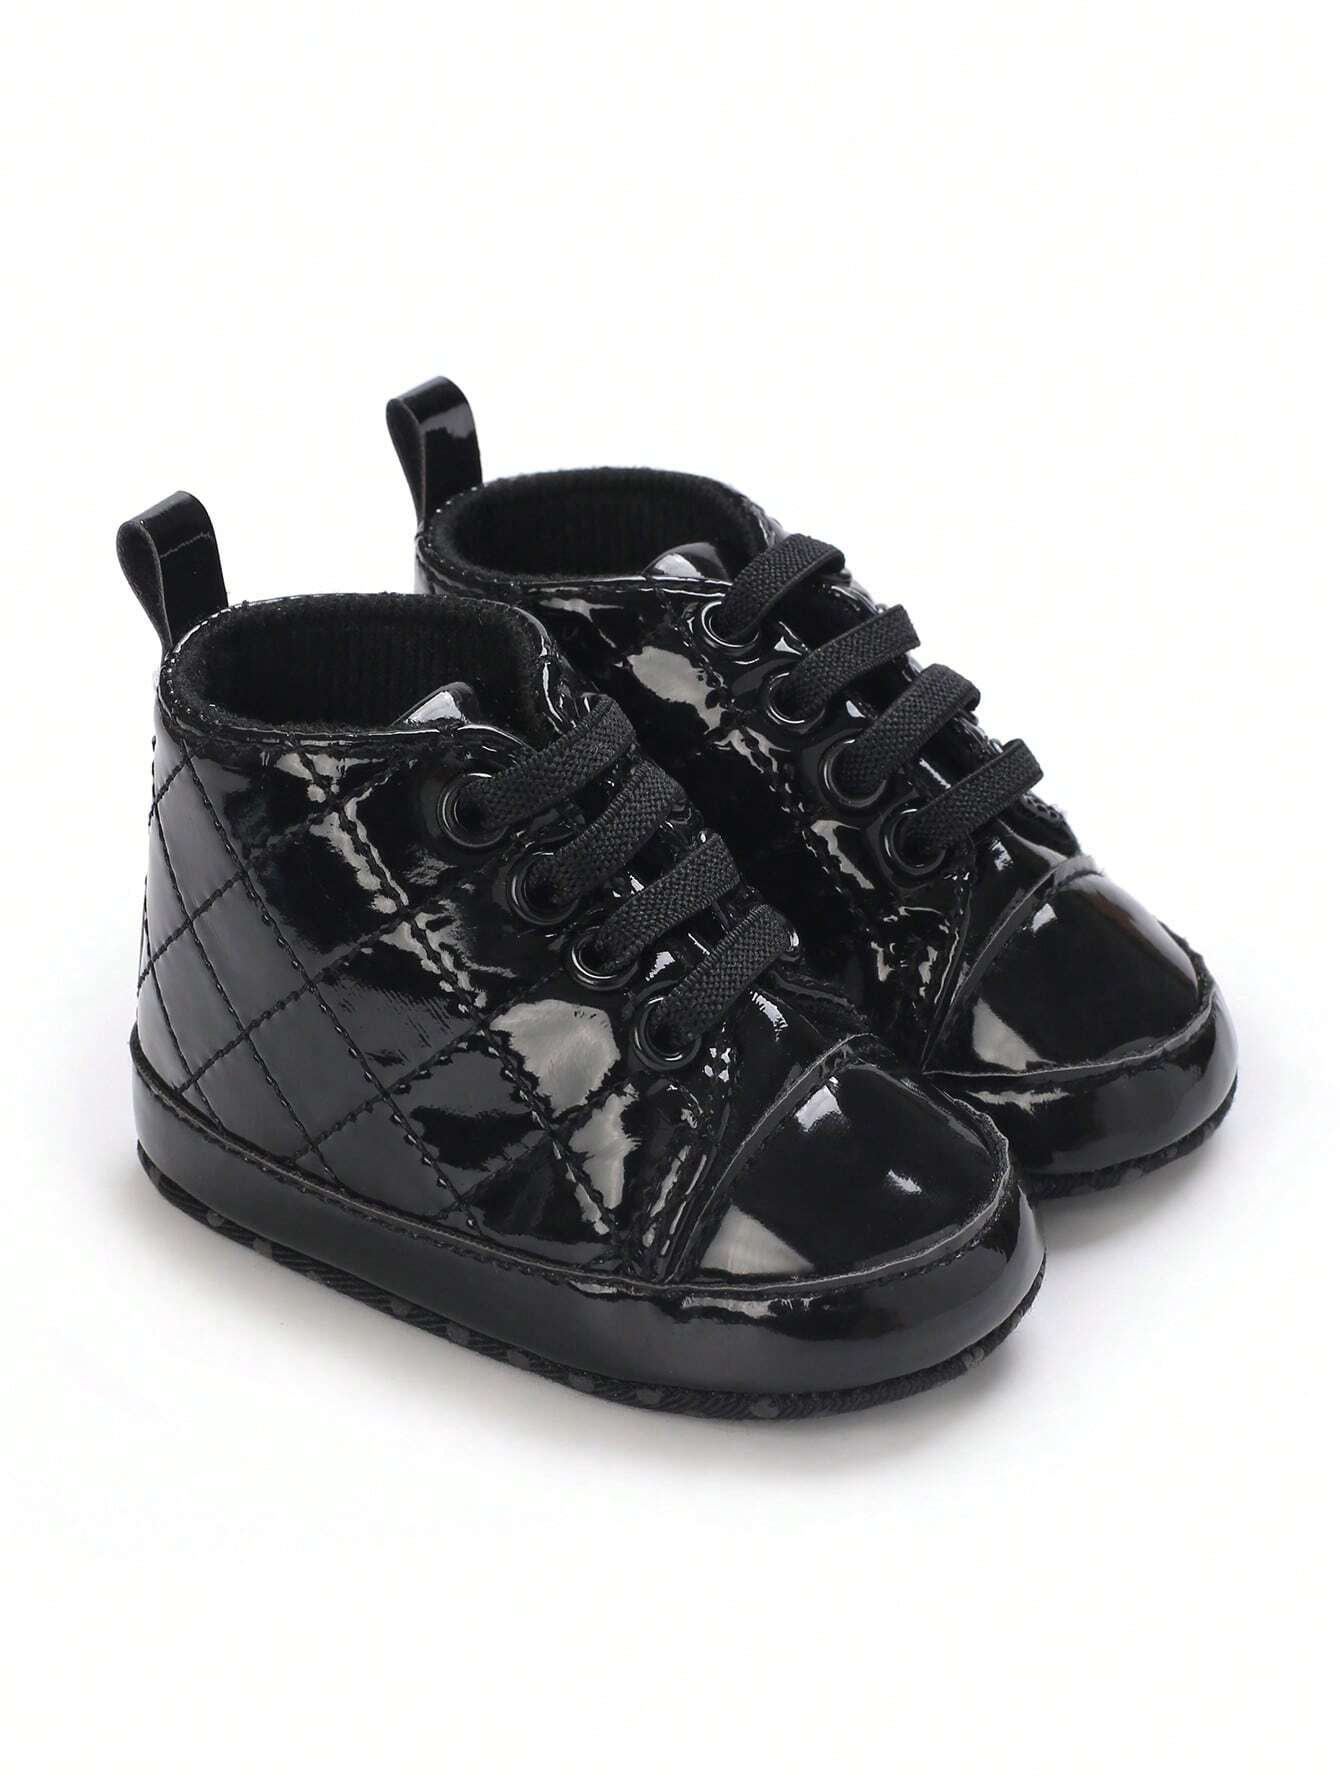 Baby Boys' Casual Shoes, Lightweight, Comfortable Sneakersss